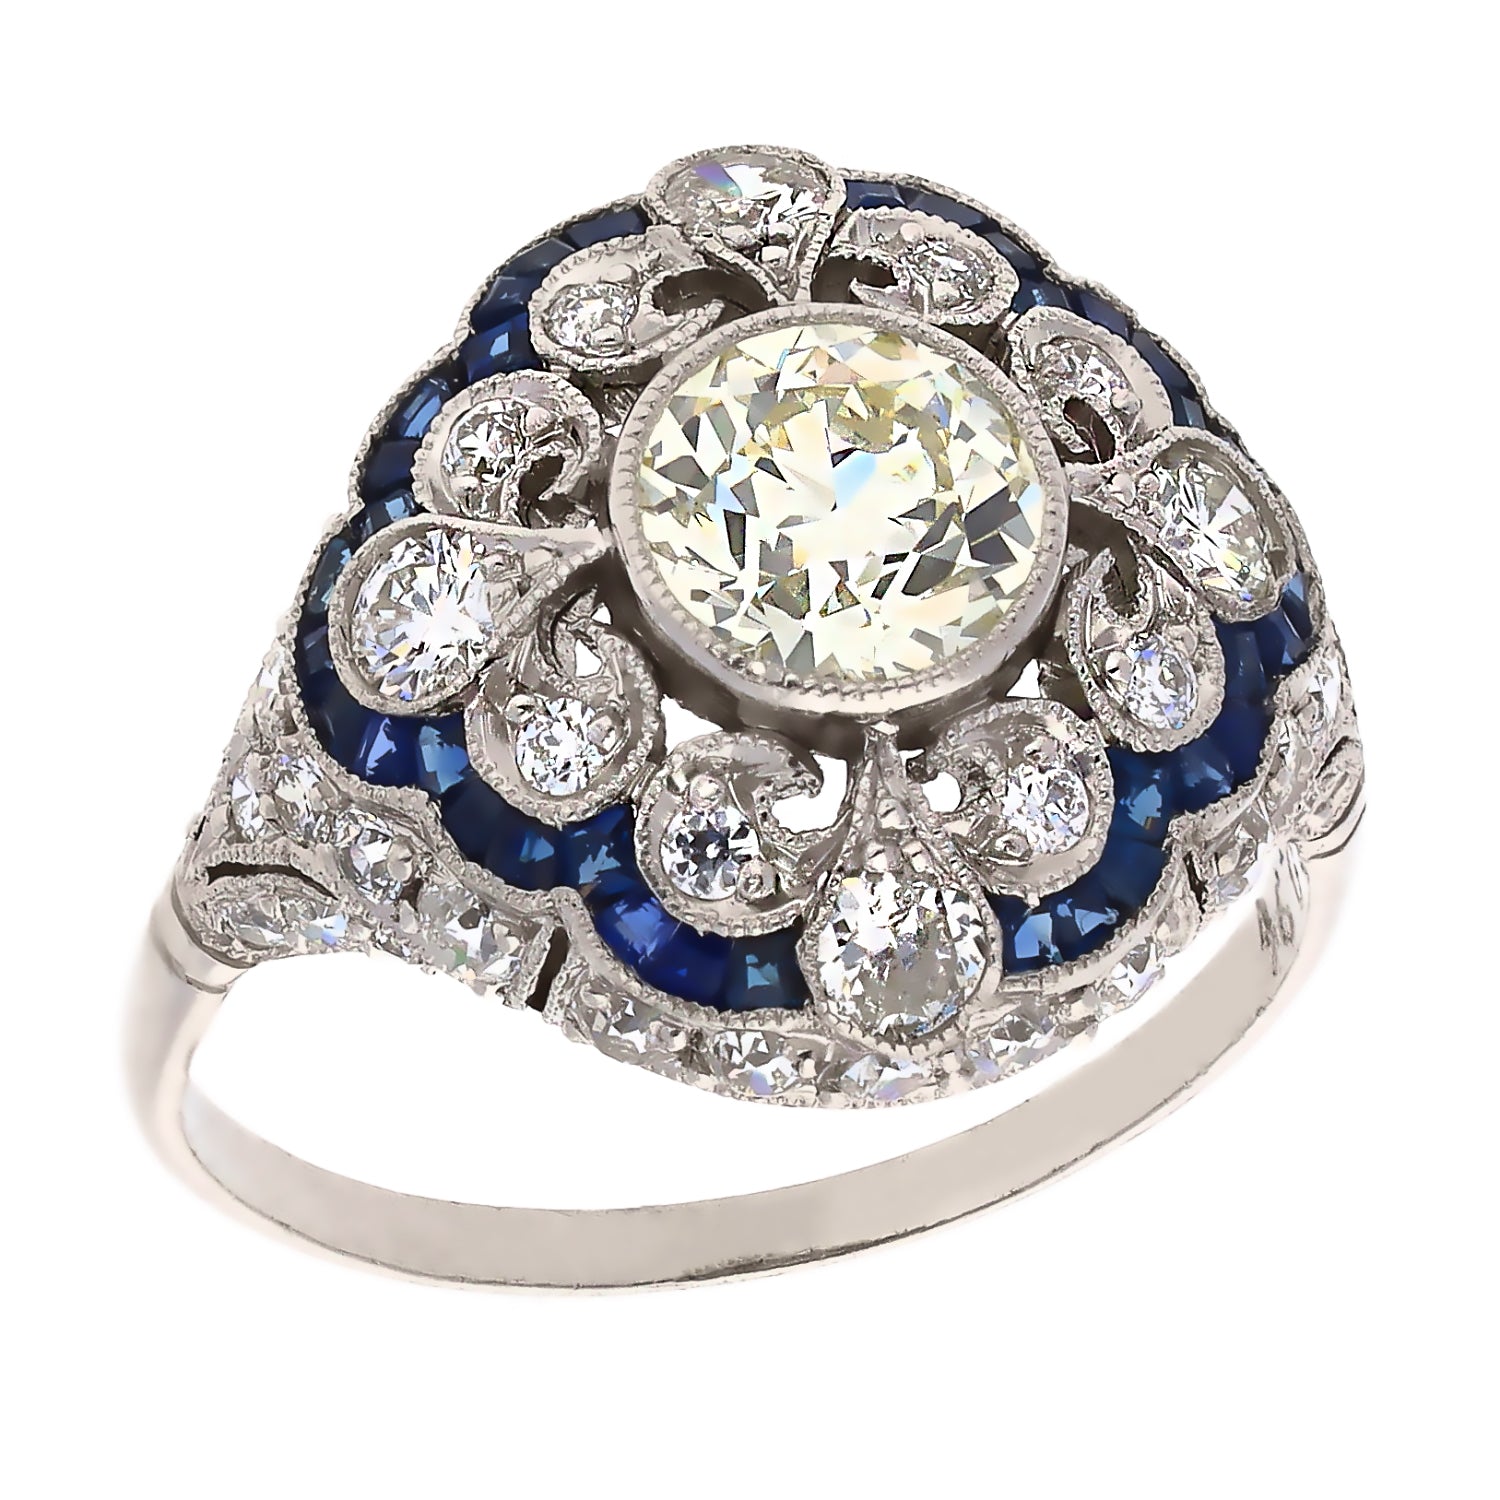 Vintage Platinum Euro Cut Diamond and French Cut Sapphire Ring